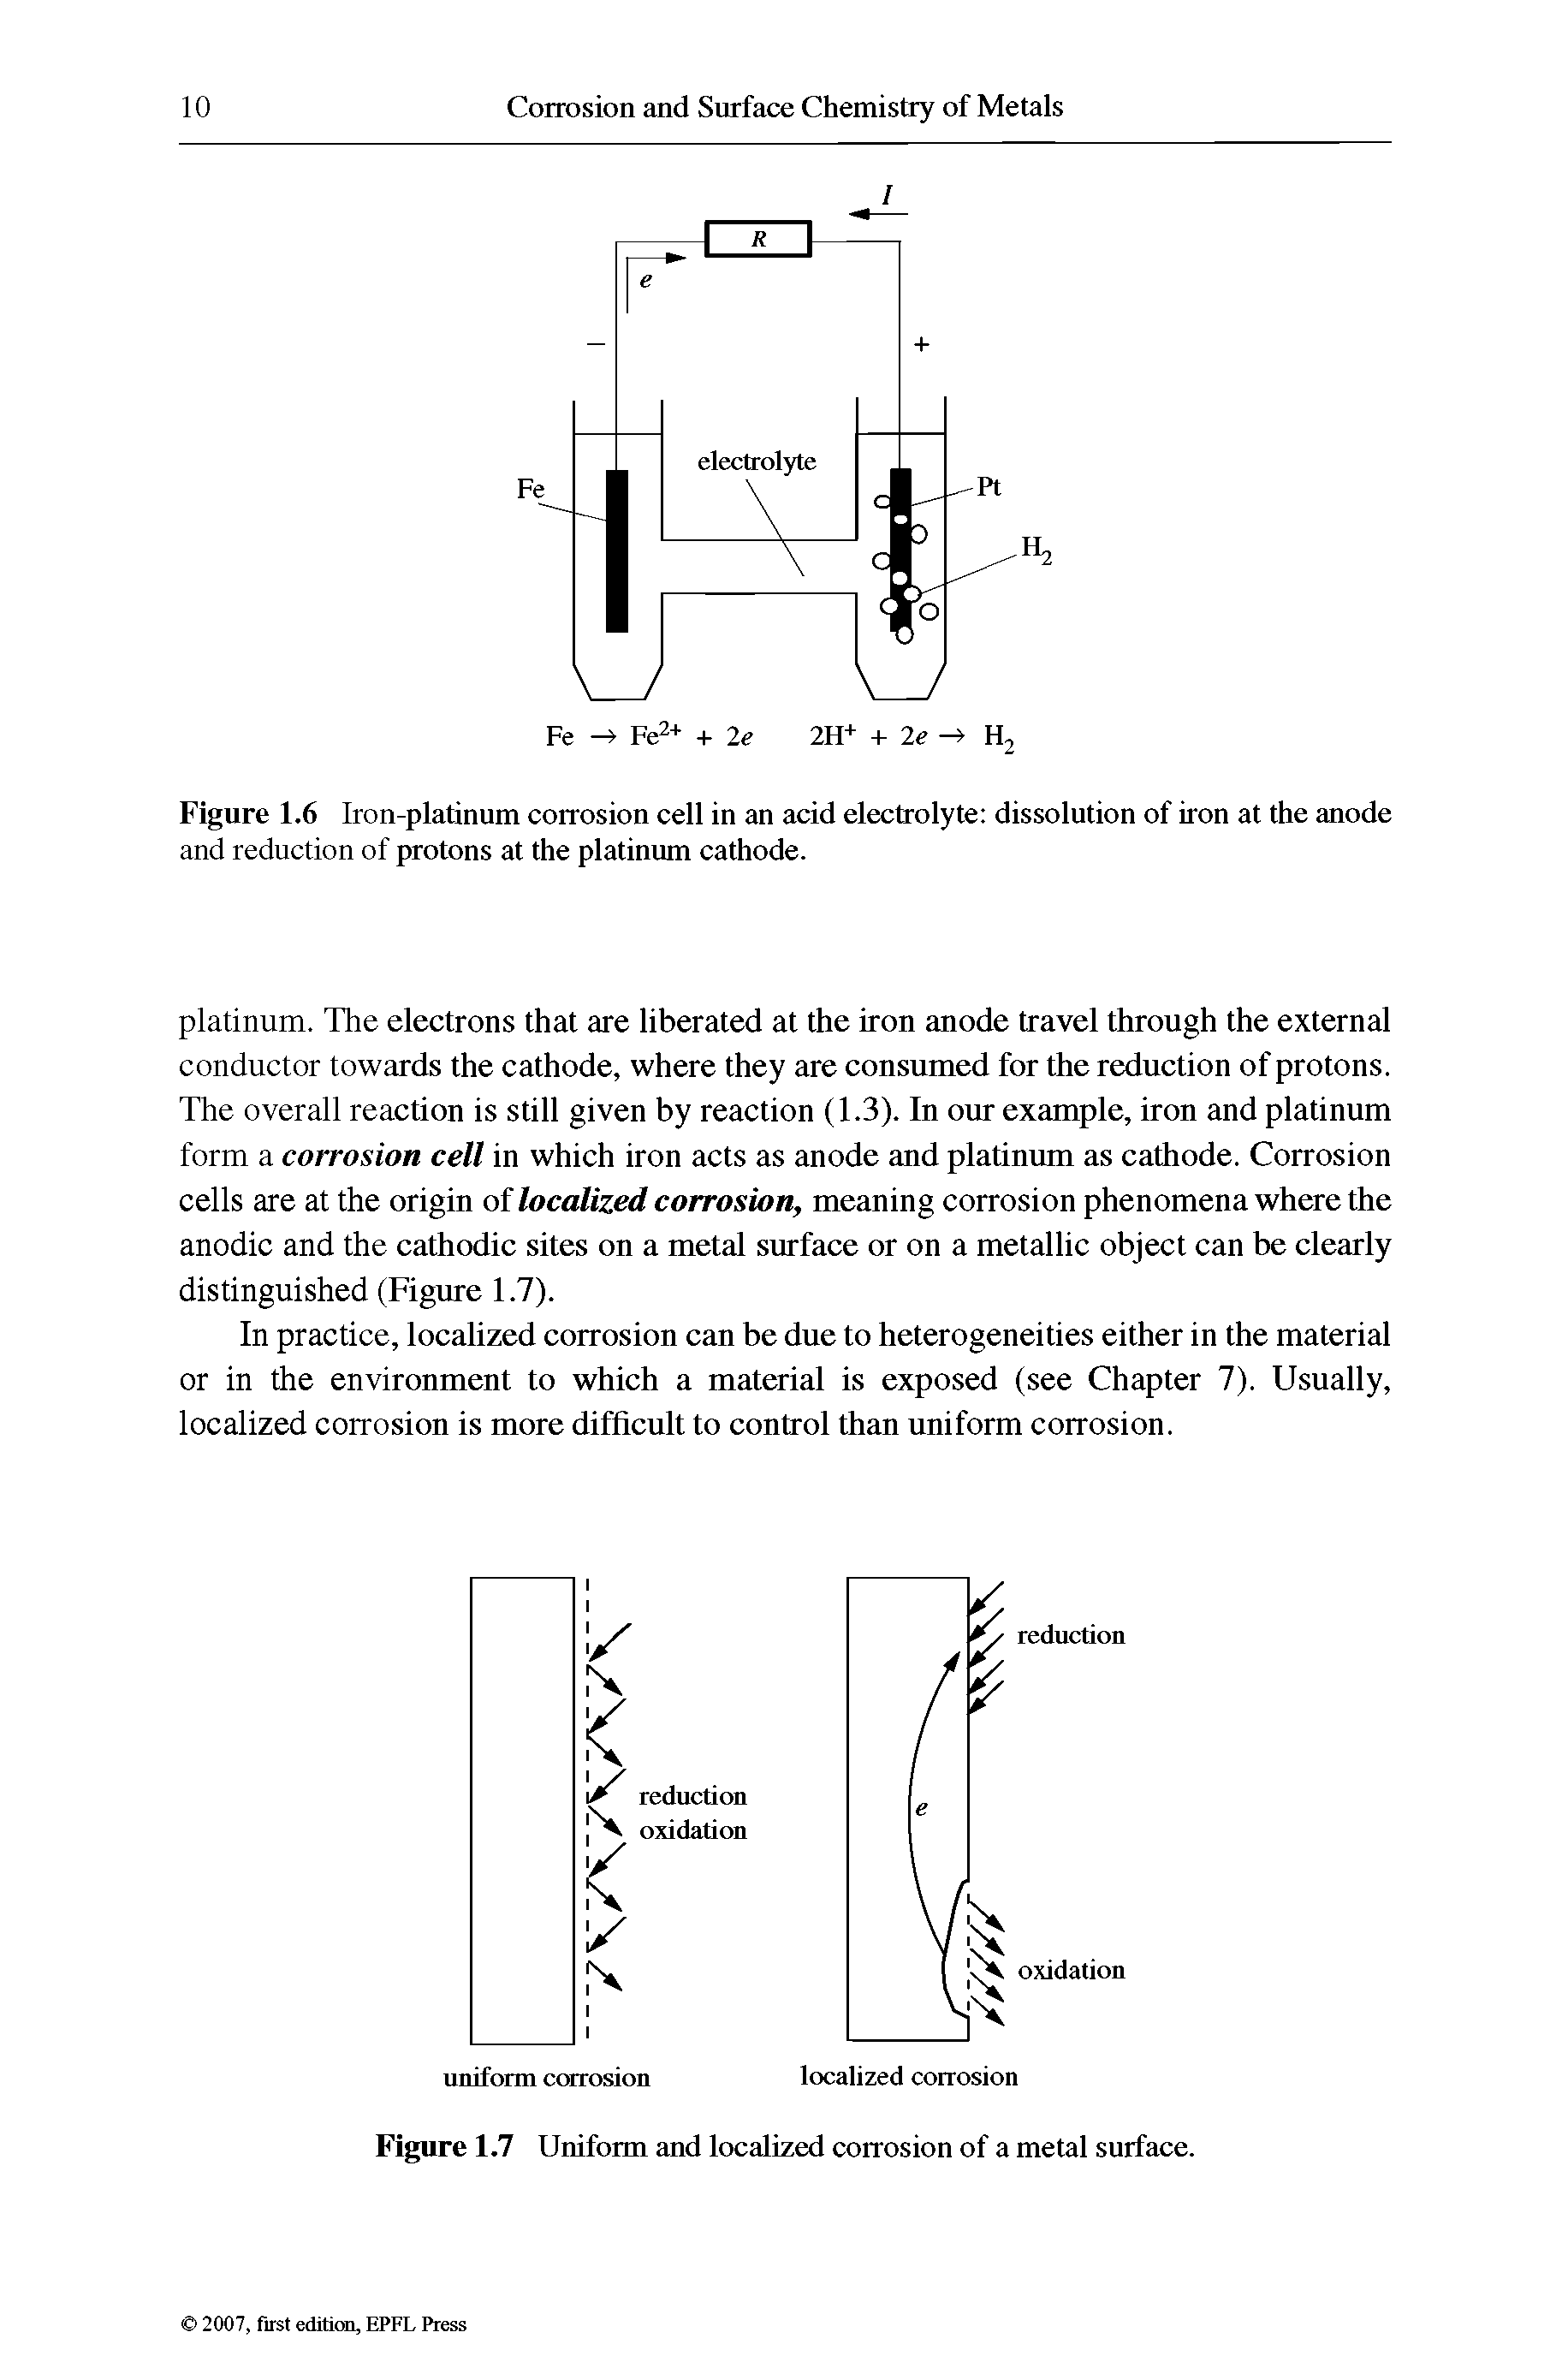 Figure 1.6 Iron-platinum corrosion cell in an acid electrolyte dissolution of iron at the anode and reduction of protons at the platinum cathode.